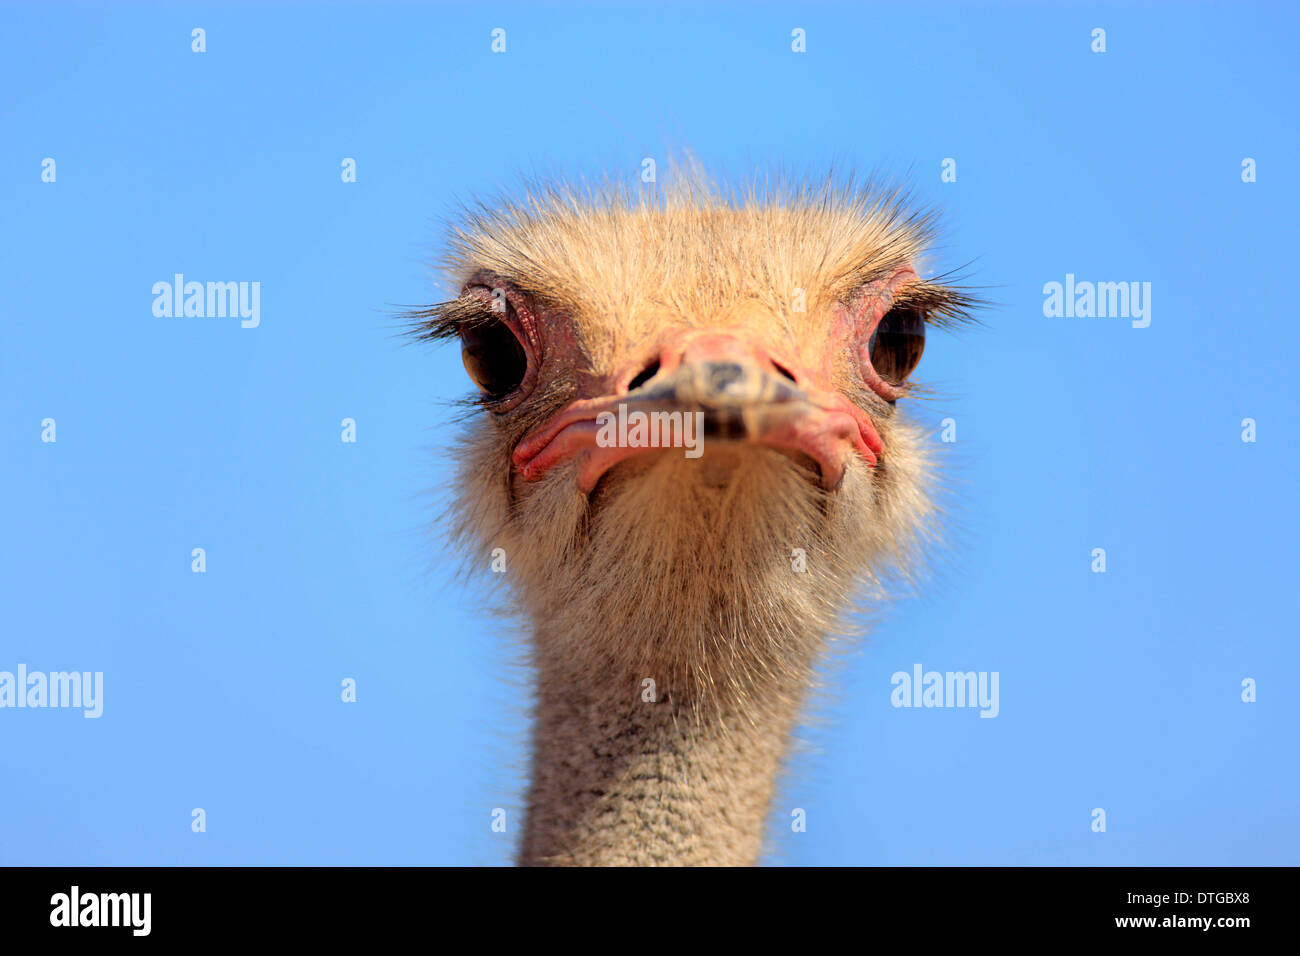 South African Ostrich, male, Oudtshoorn, Klein Karoo, South Africa / (Struthio camelus australis) Stock Photo